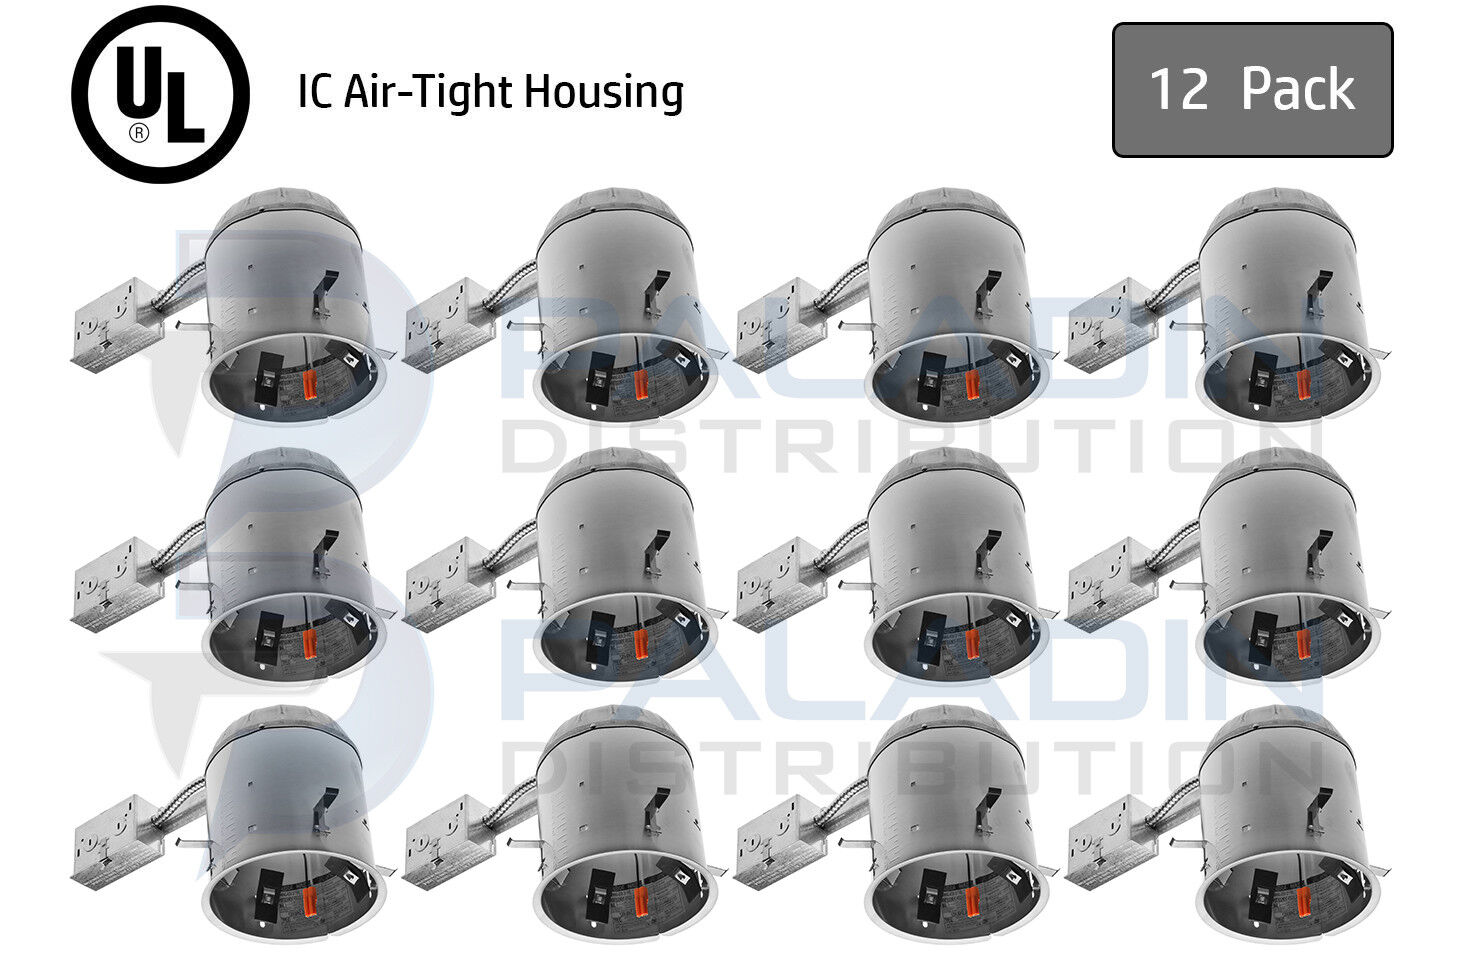 6" Inch Remodel Recessed Can Light Housing - IC Air Tight LED (12 Pack) Paladin 6-RM-12PK-LED